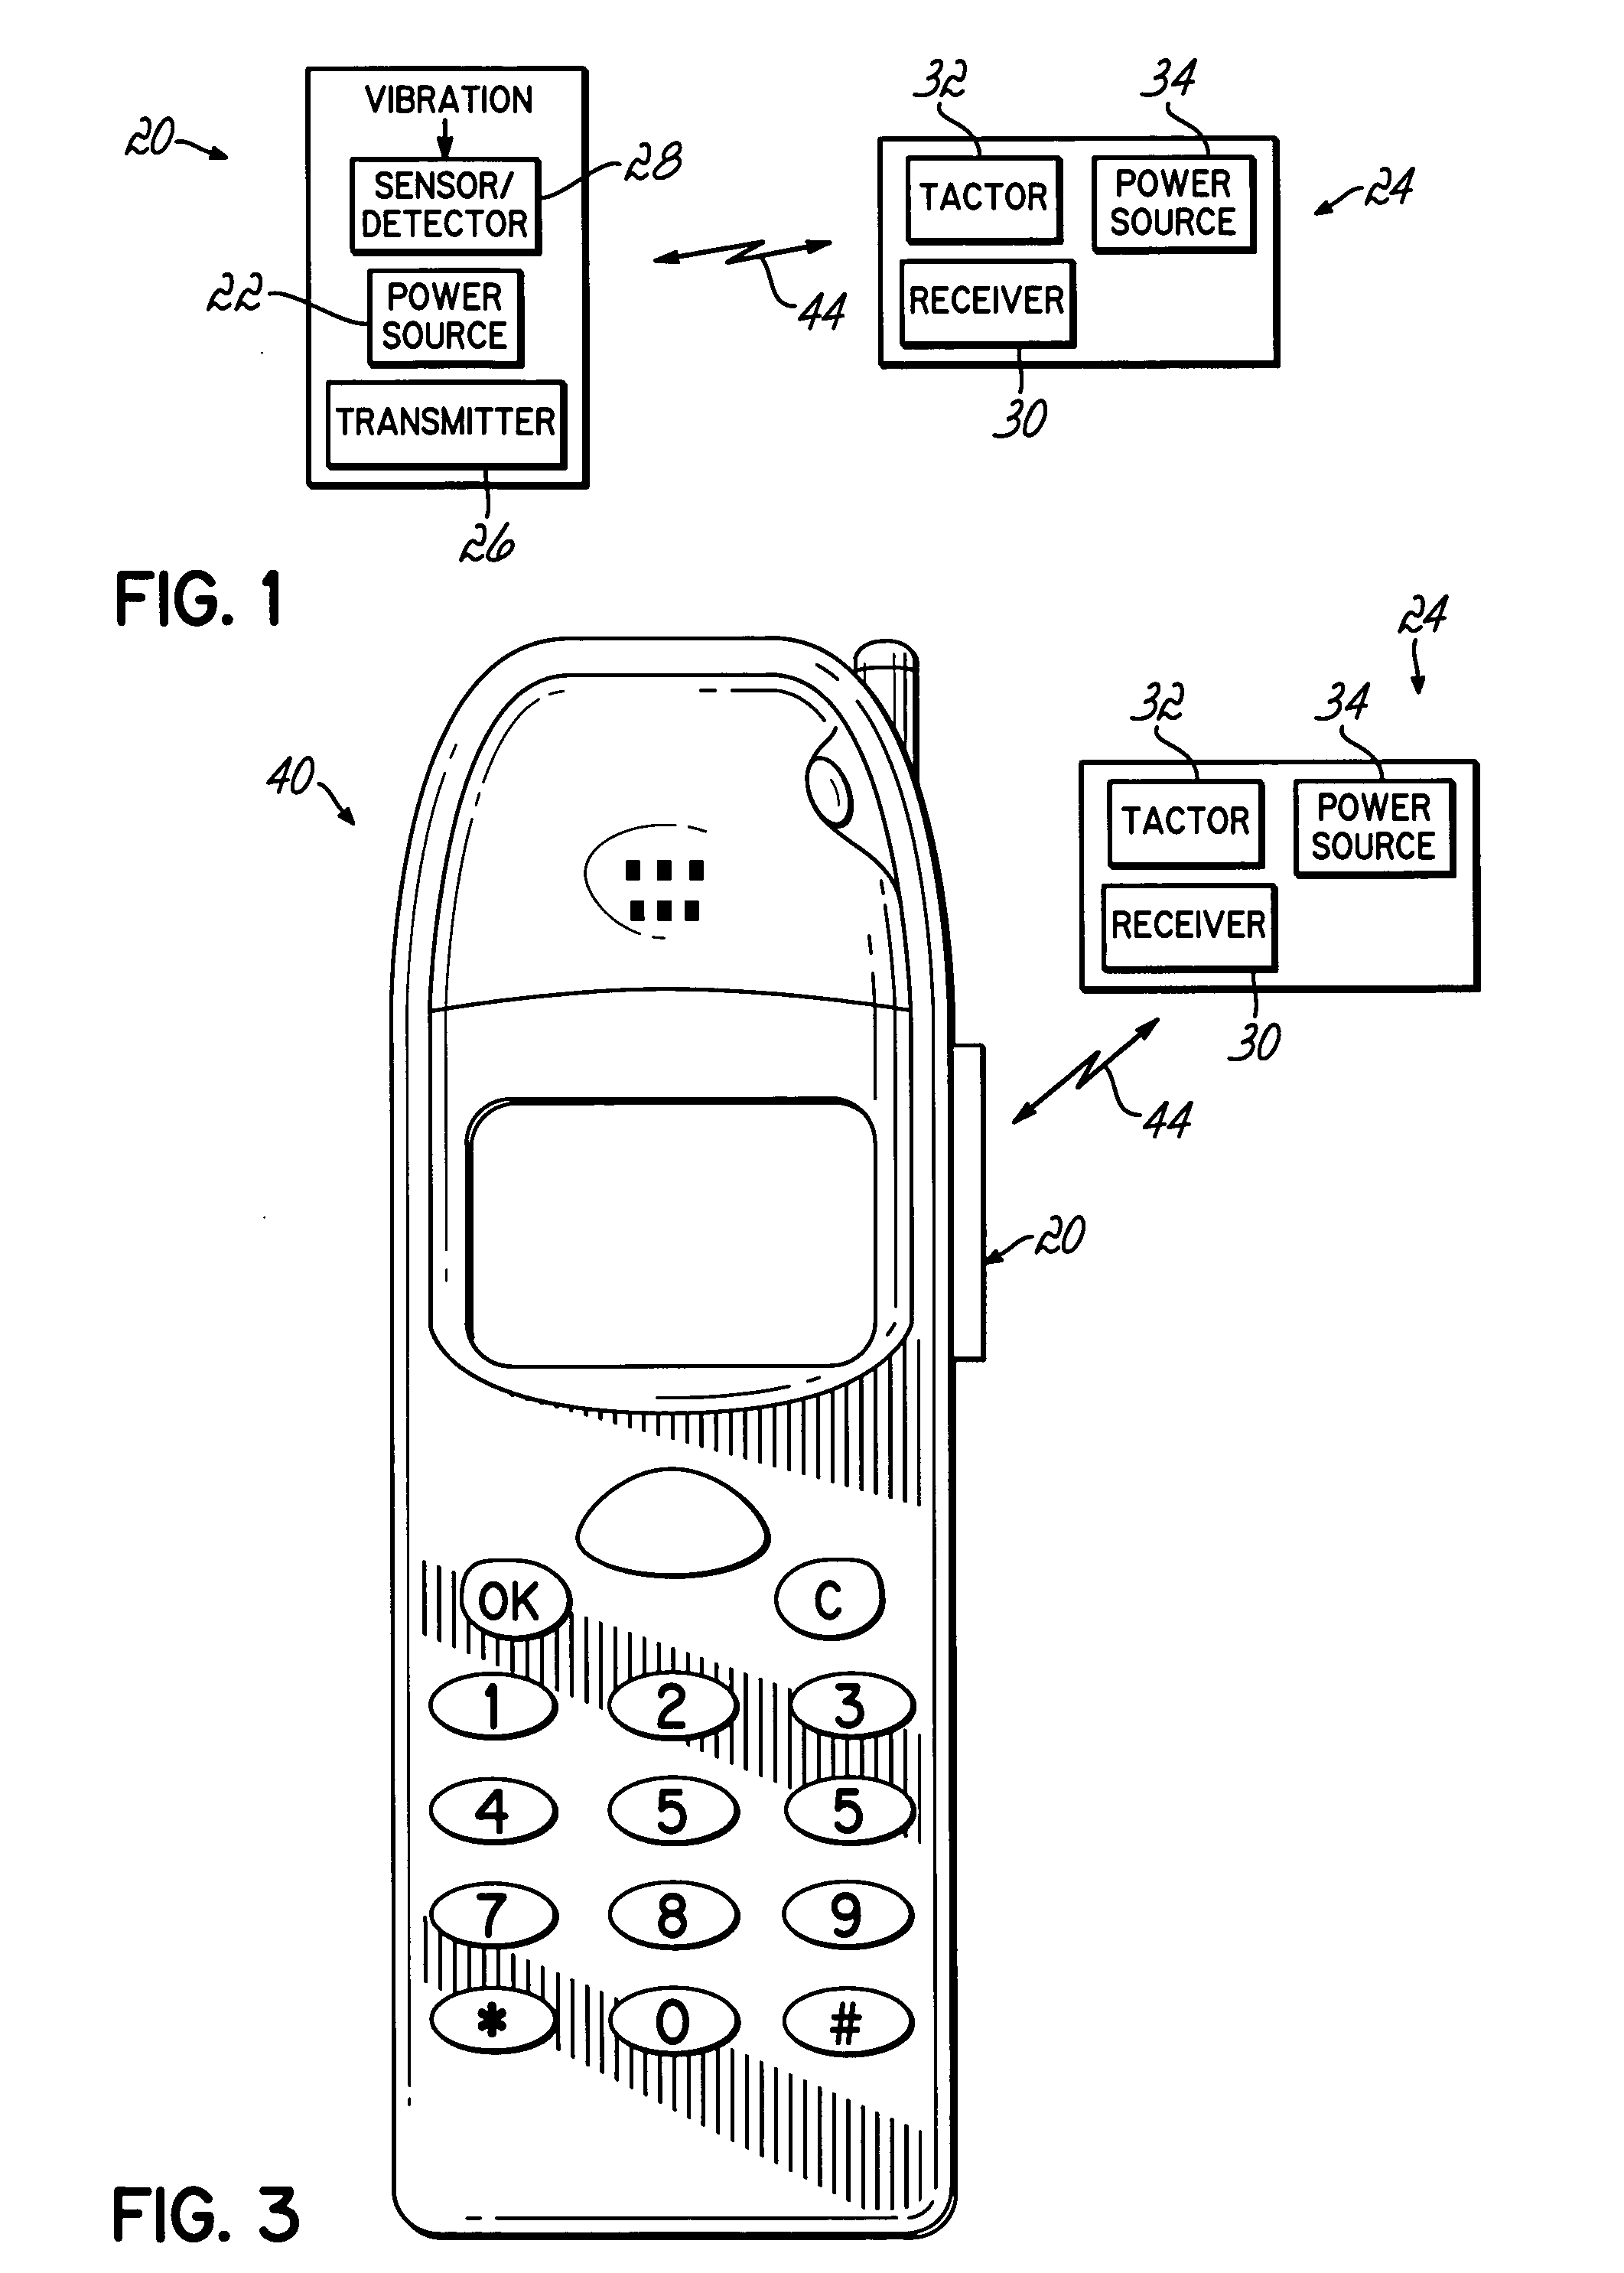 Portable and remotely activated alarm and notification tactile communication device and system